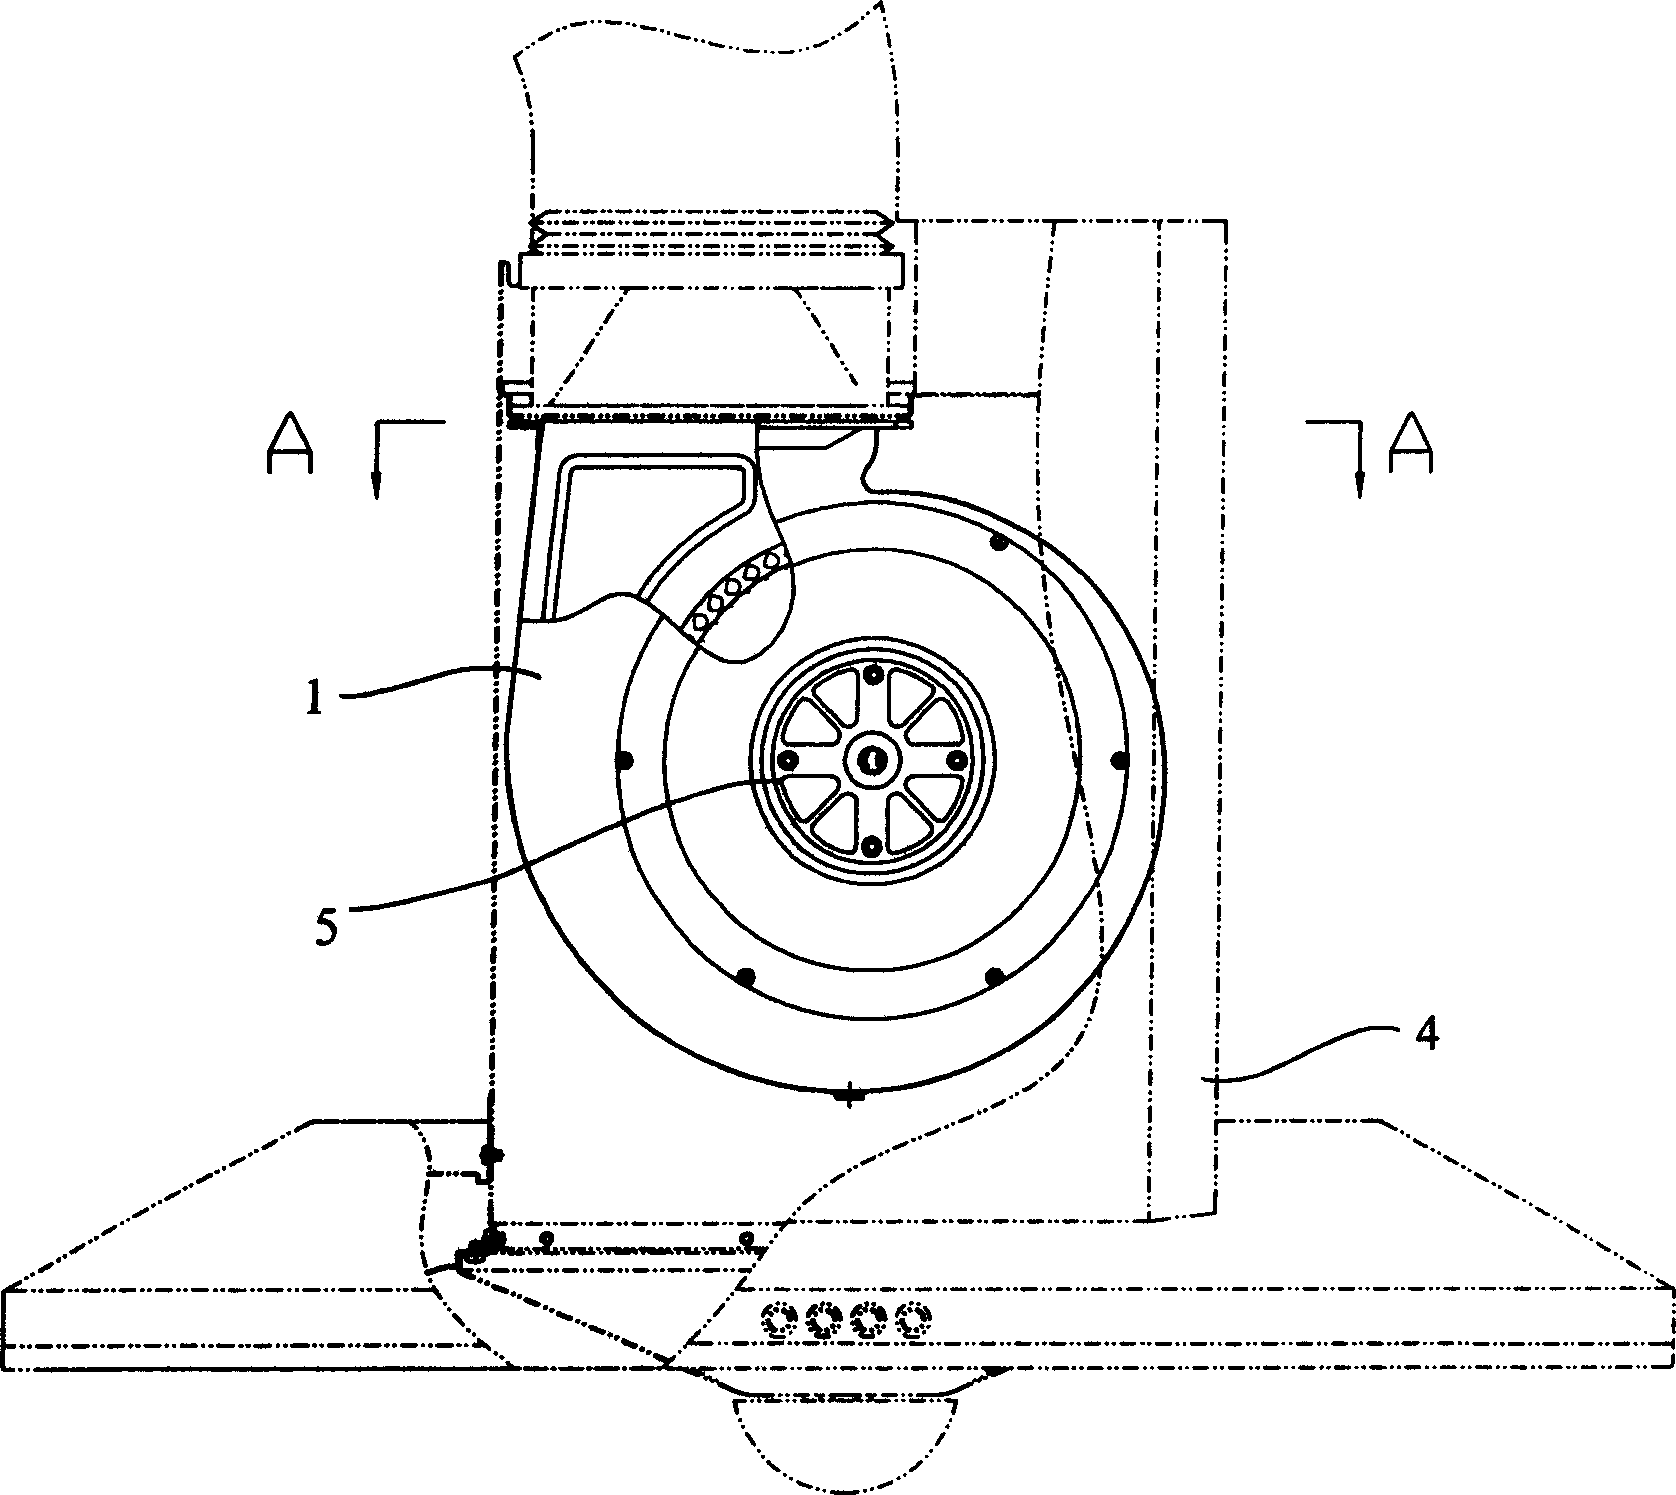 Fan volute structure with air inlets on double sides for European-style smoke exhaust ventilator